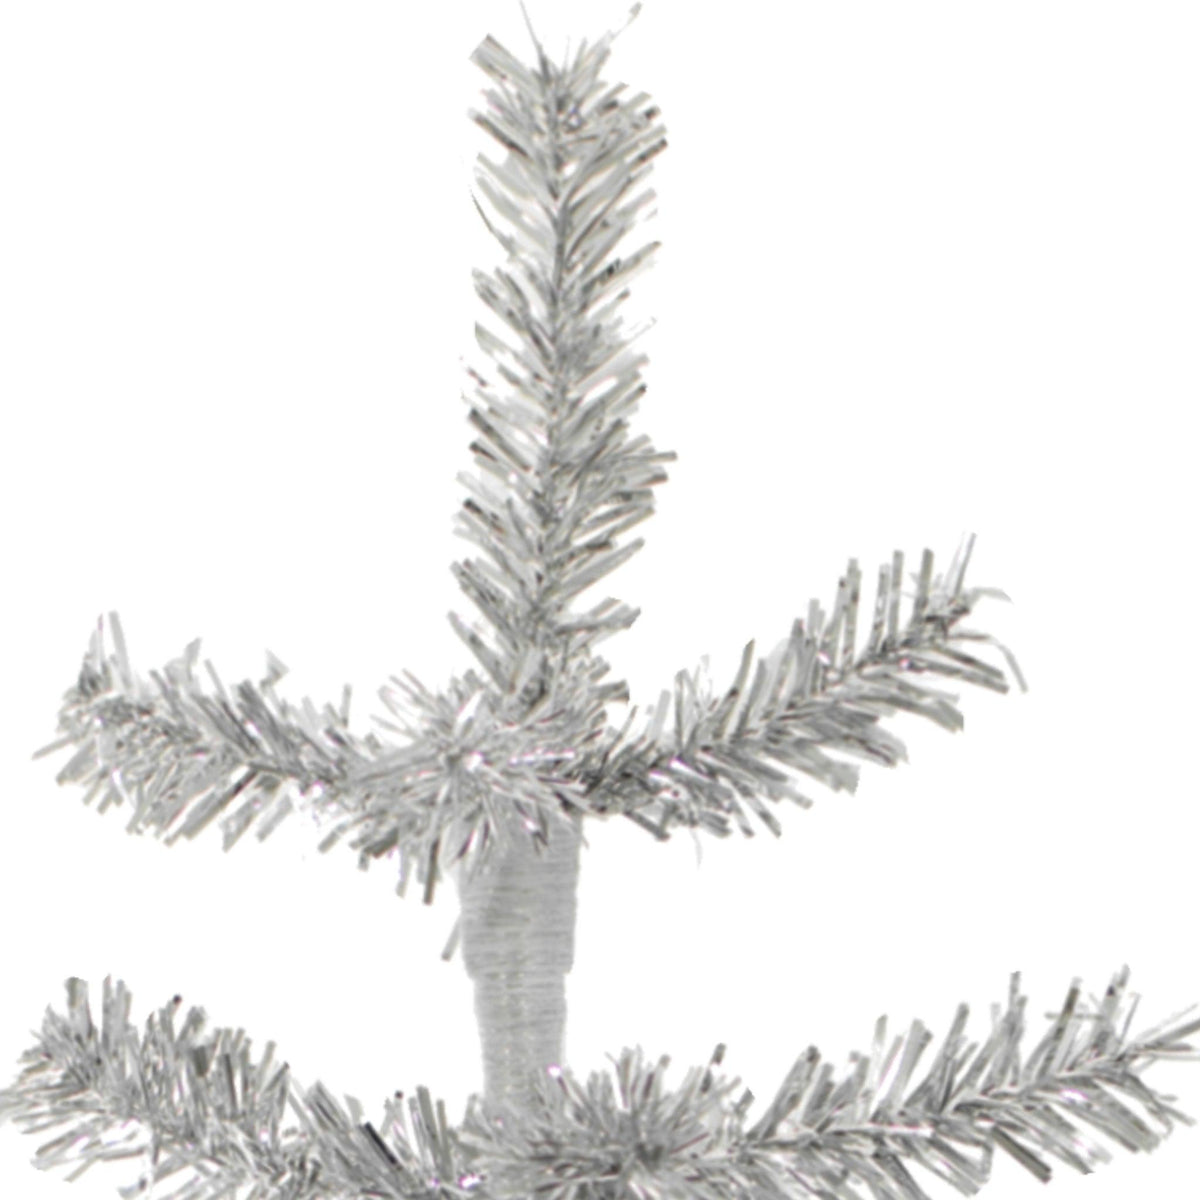 Top of the 1in thin brush Silver Tinsel Christmas Tree